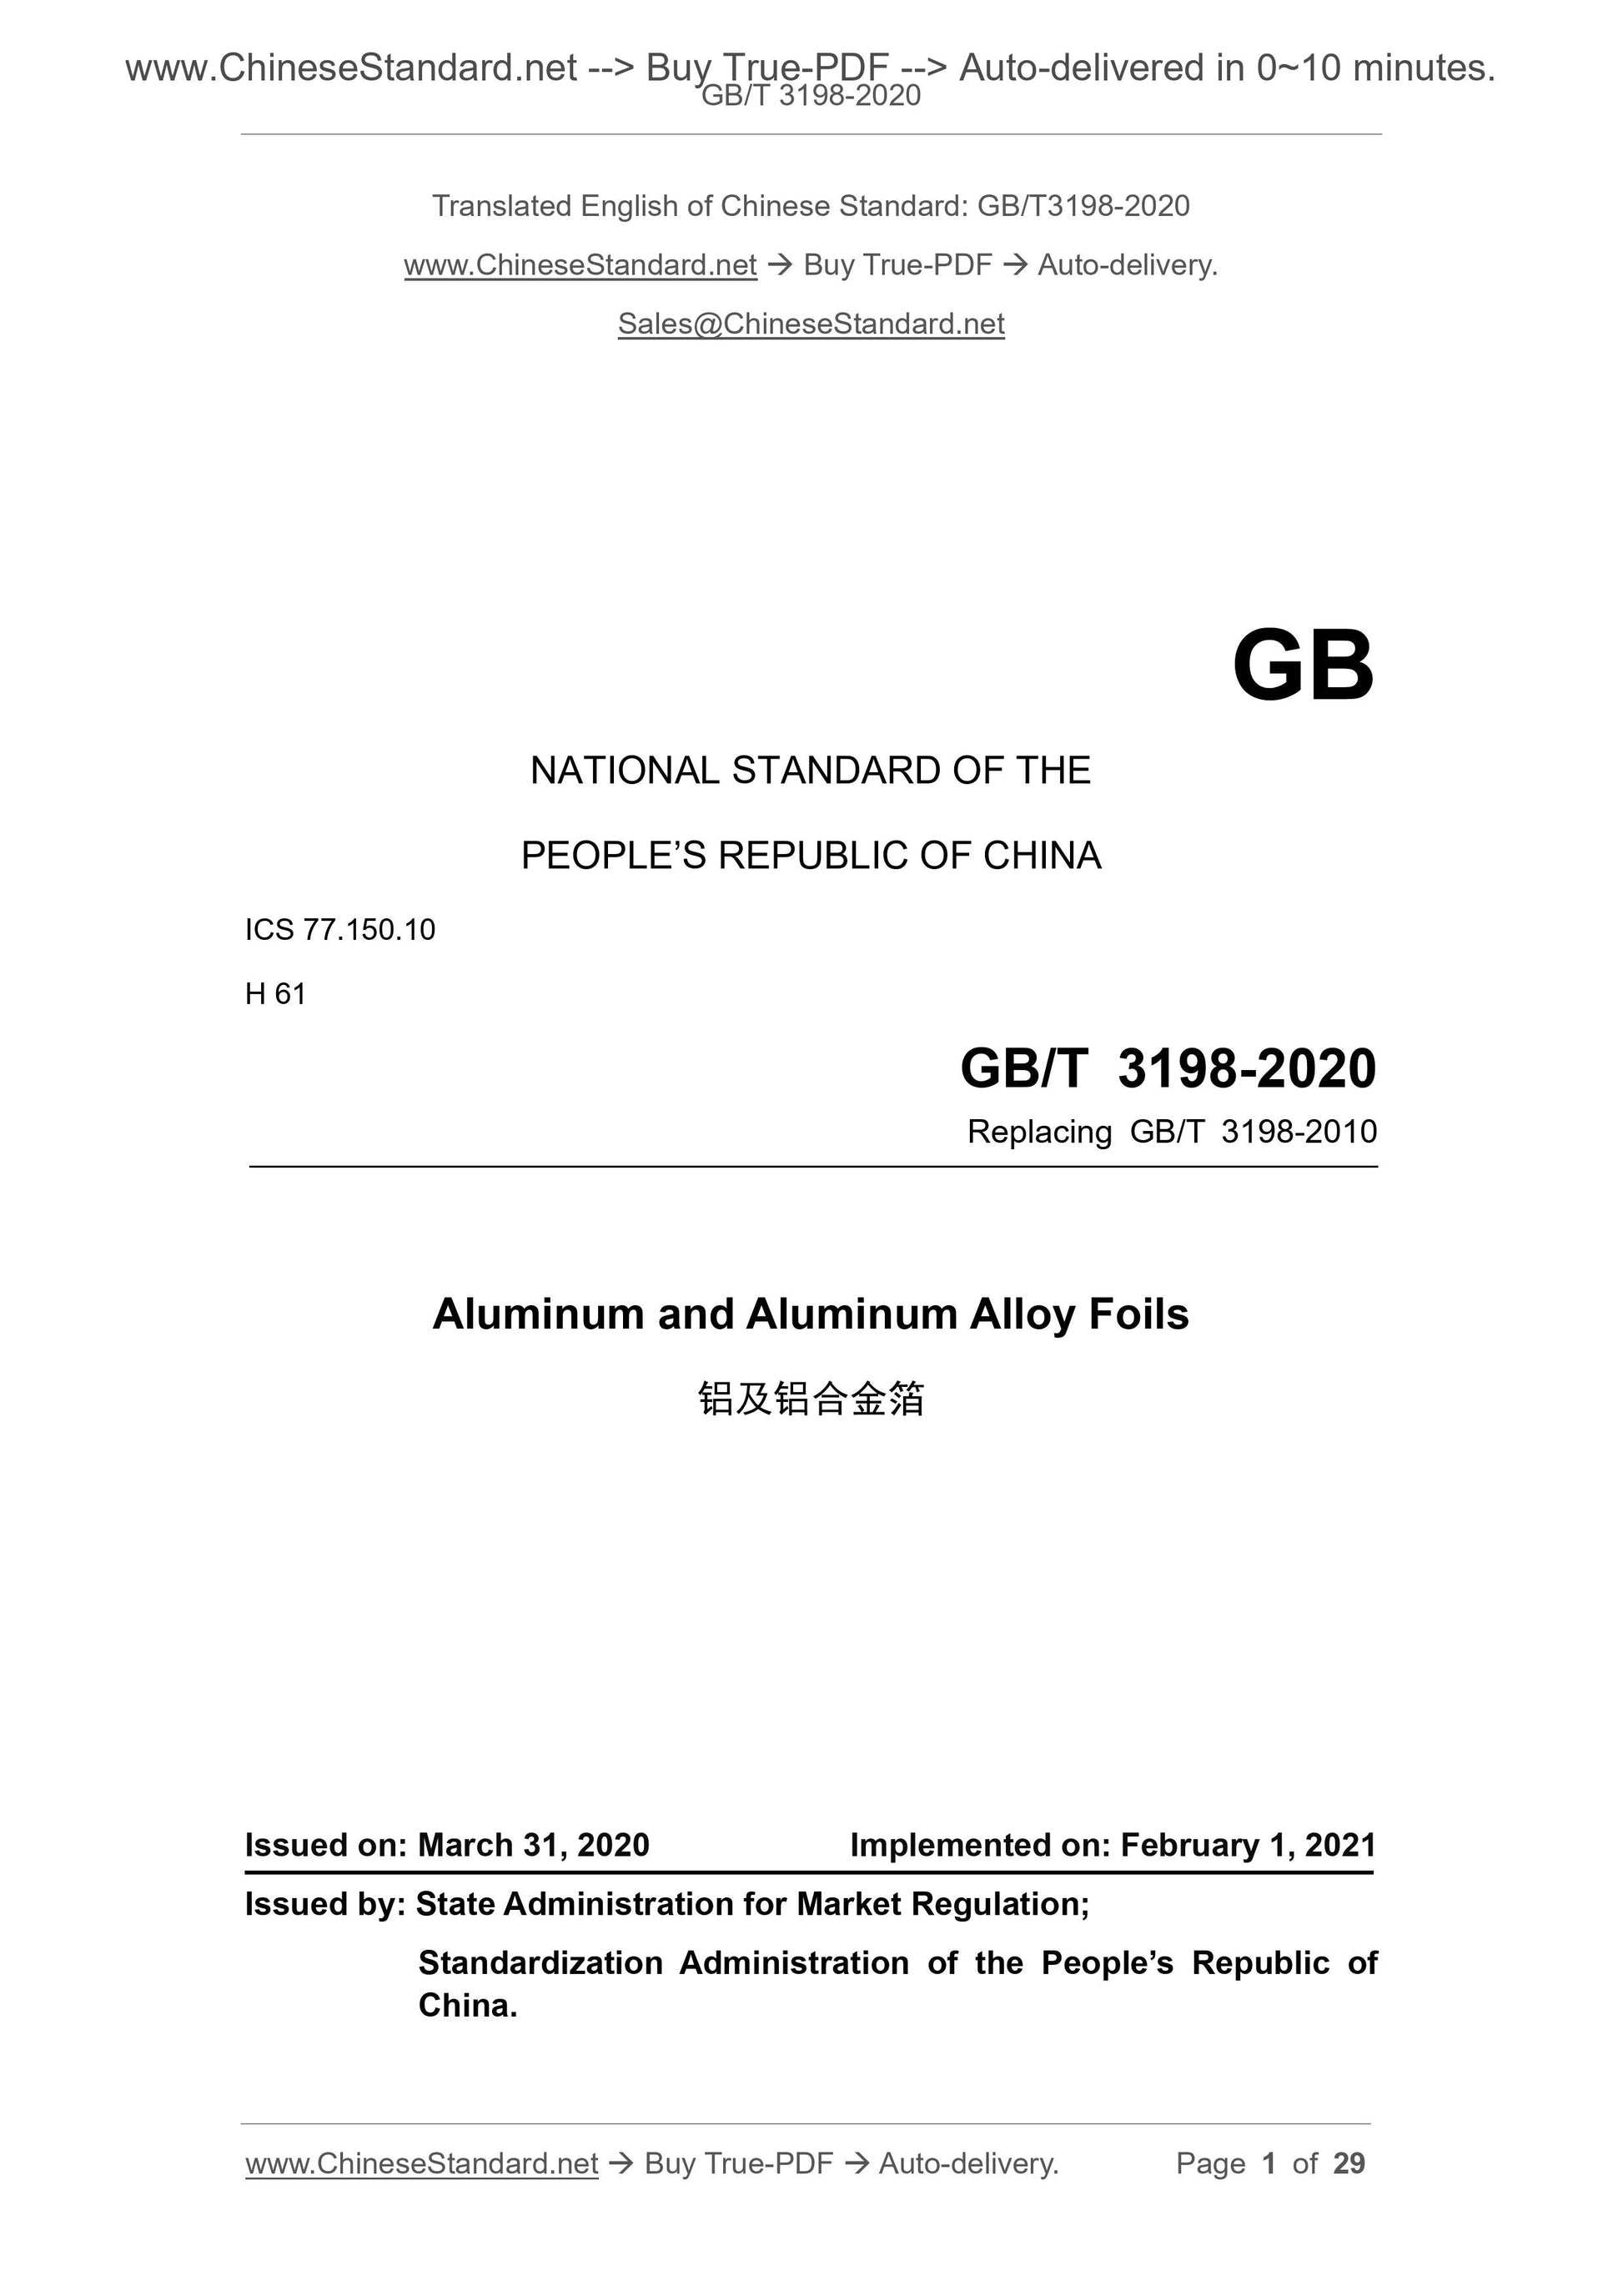 GB/T 3198-2020 Page 1